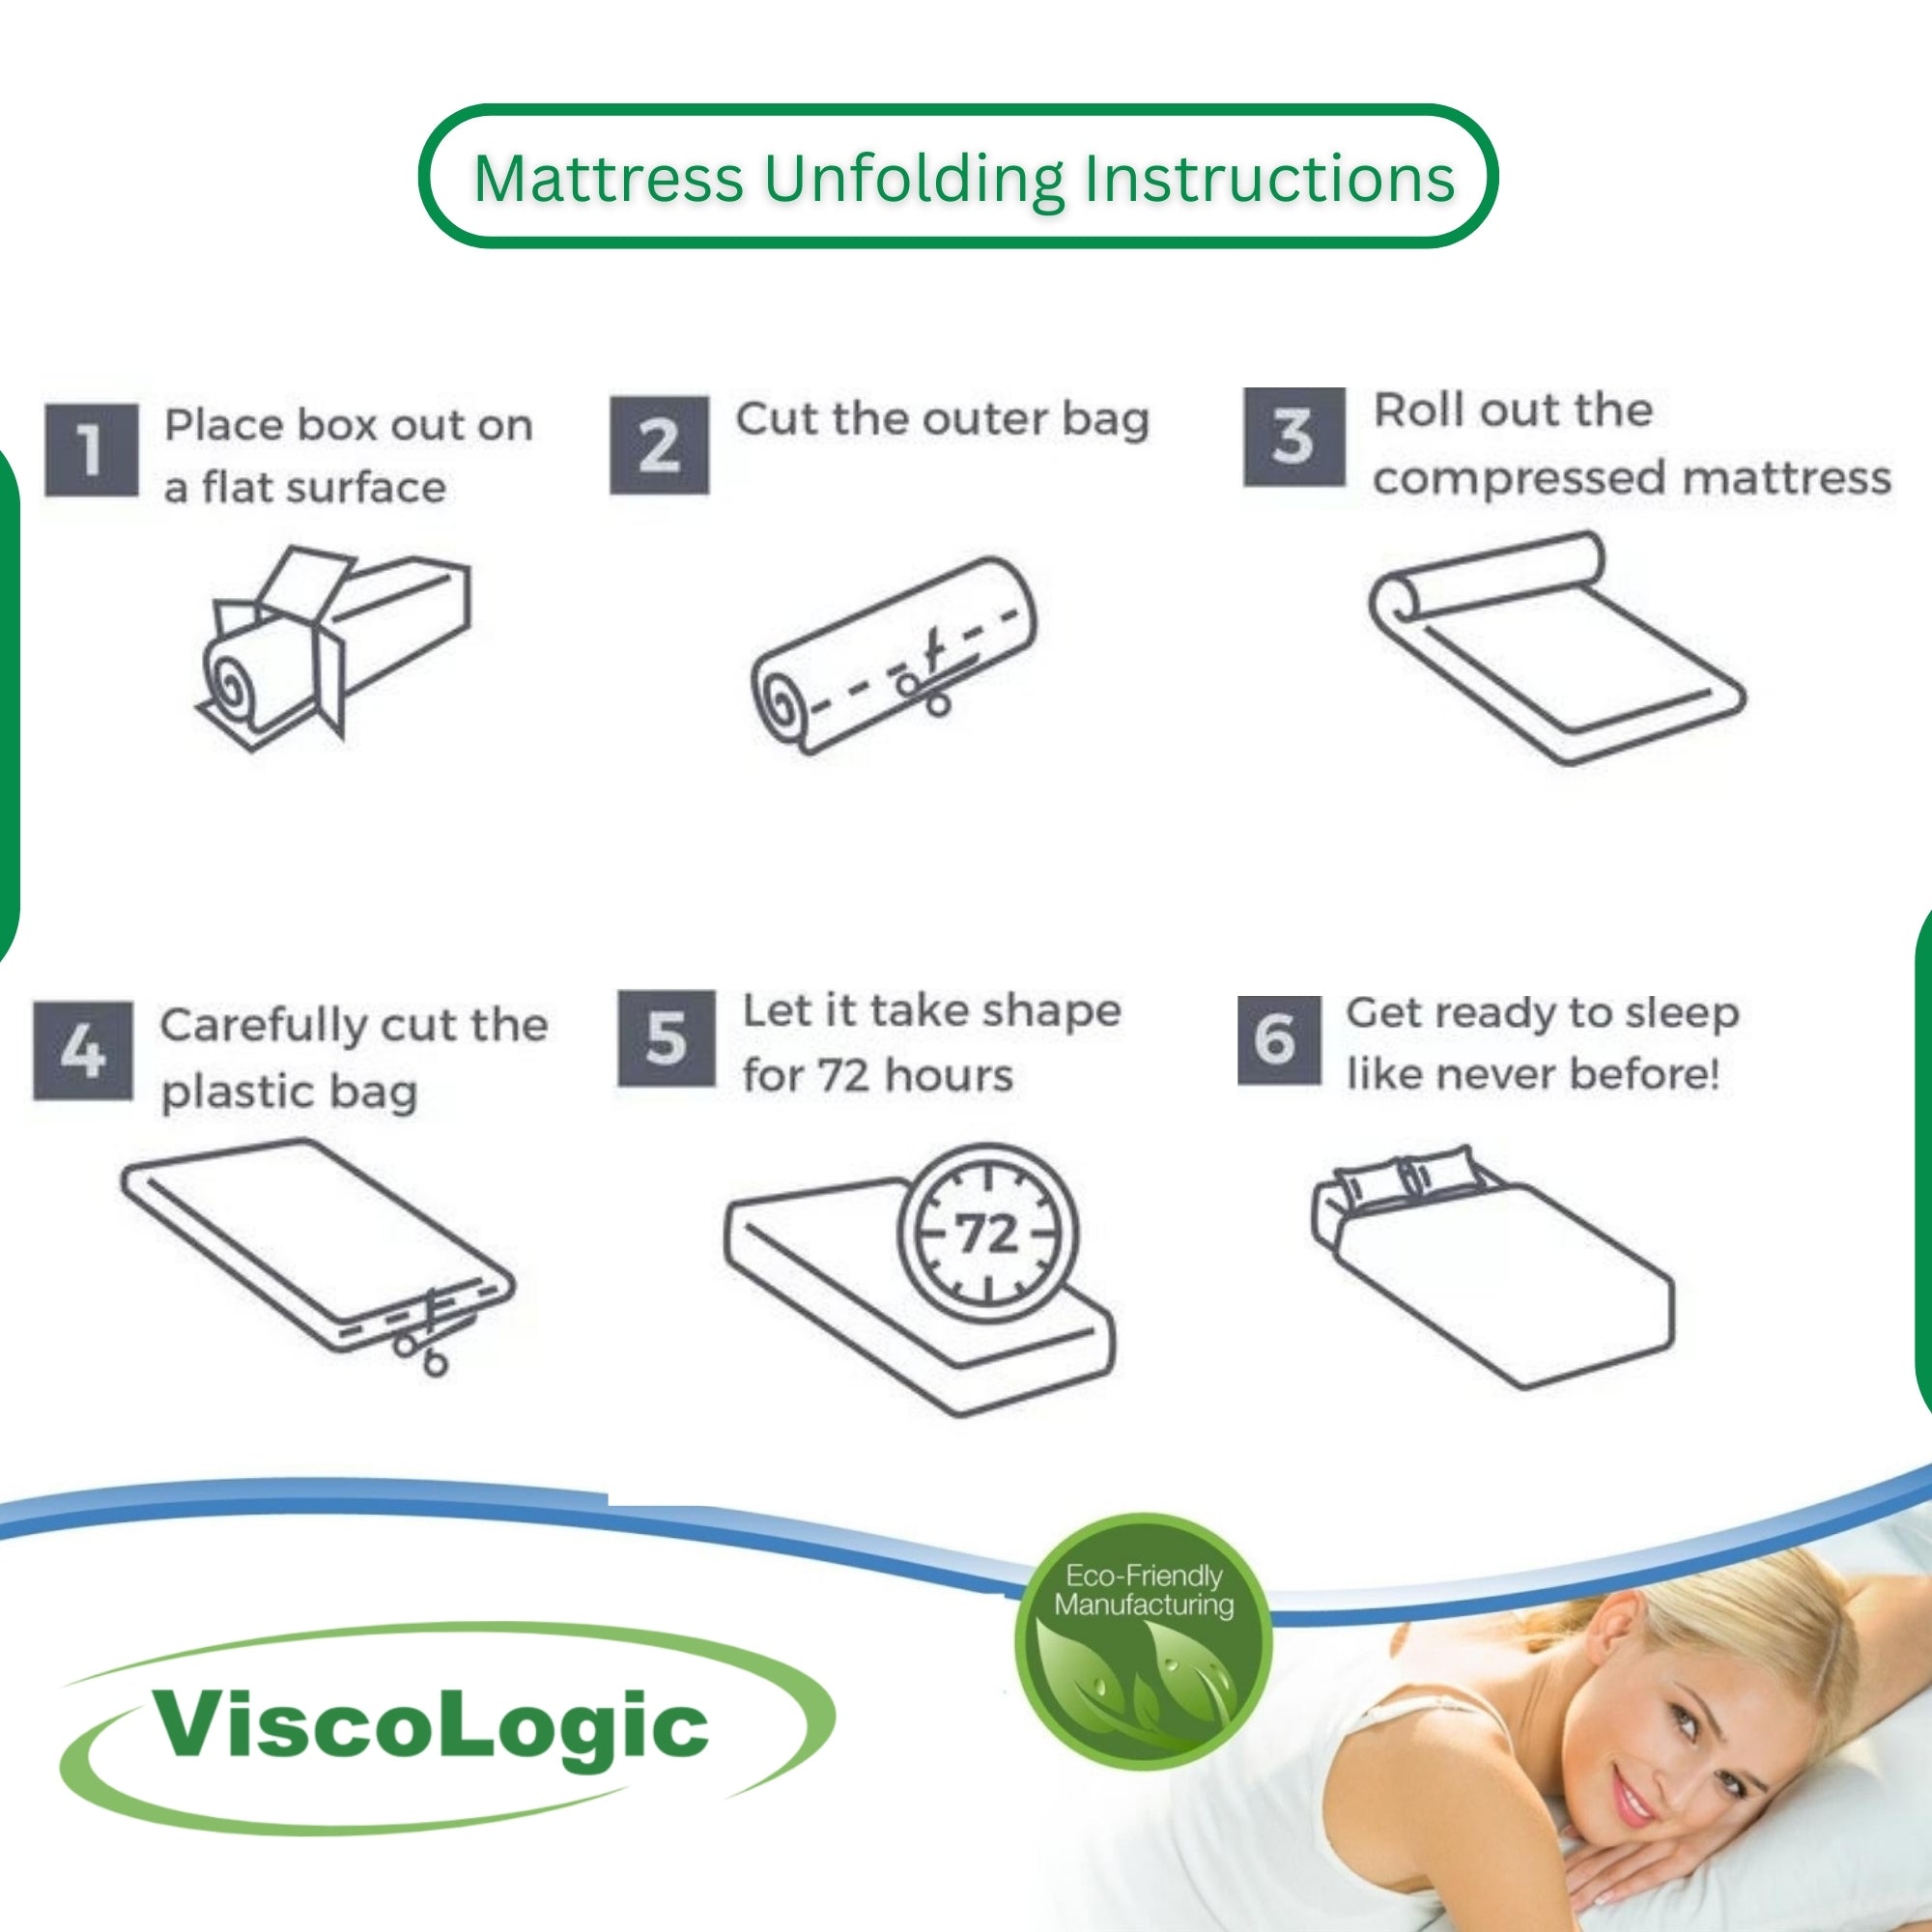 ViscoLogic Elite Memory Foam Mattress with Soft Bamboo Feel Cover, Pressure Relieving Comfort, CertiPUR-US® Certified Foam